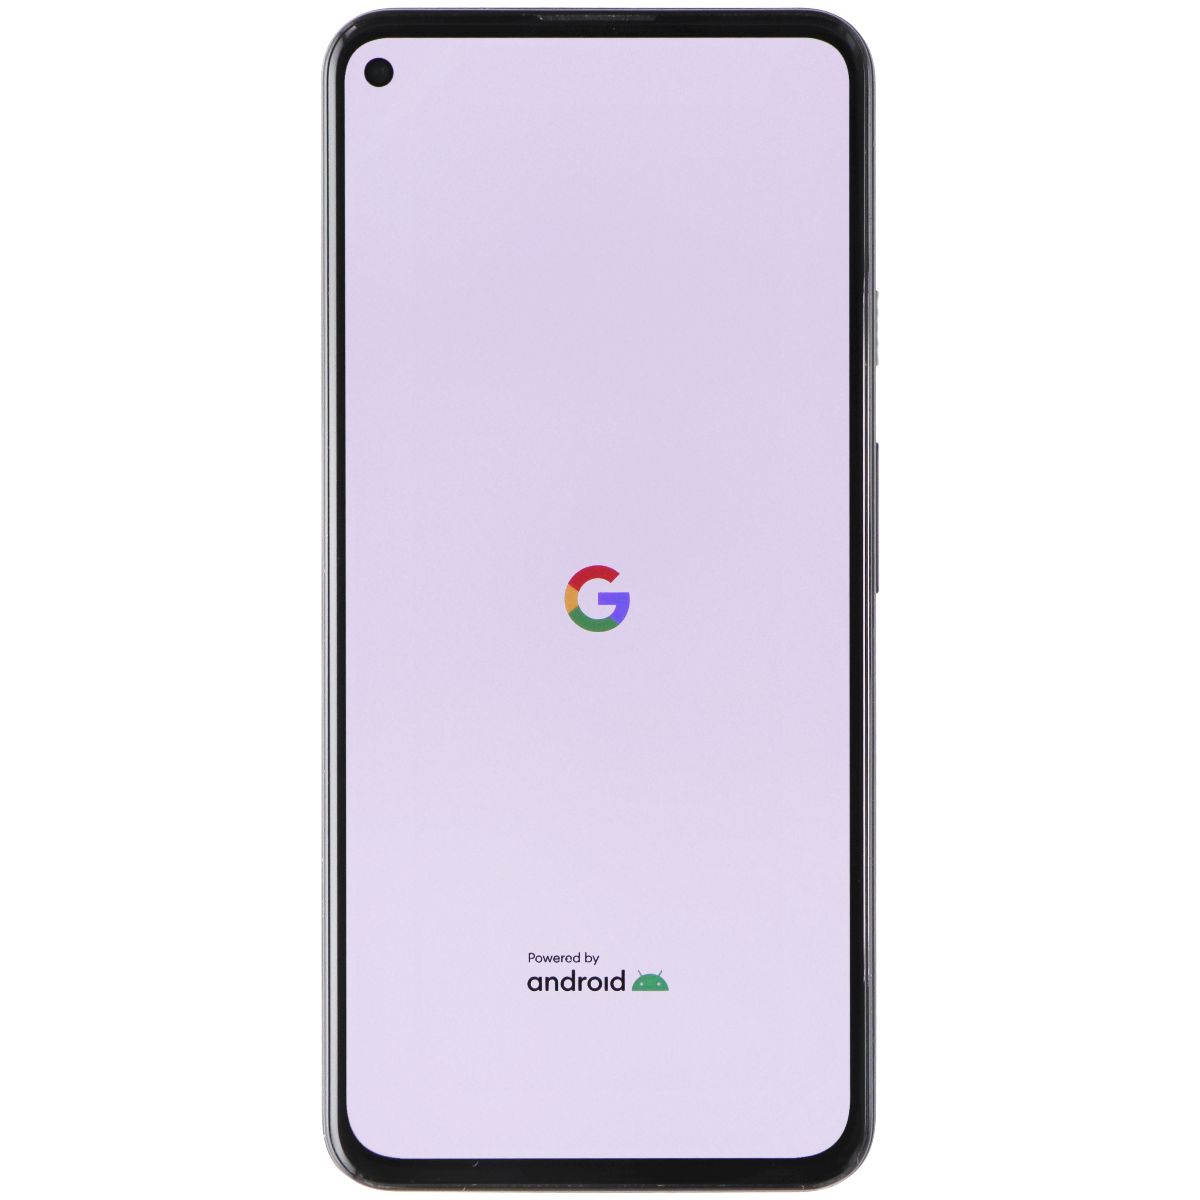 Google Pixel 5a (6.34-inch) Smartphone (G1F8F) Verizon 128GB - Mostly Black Cell Phones & Smartphones Google    - Simple Cell Bulk Wholesale Pricing - USA Seller